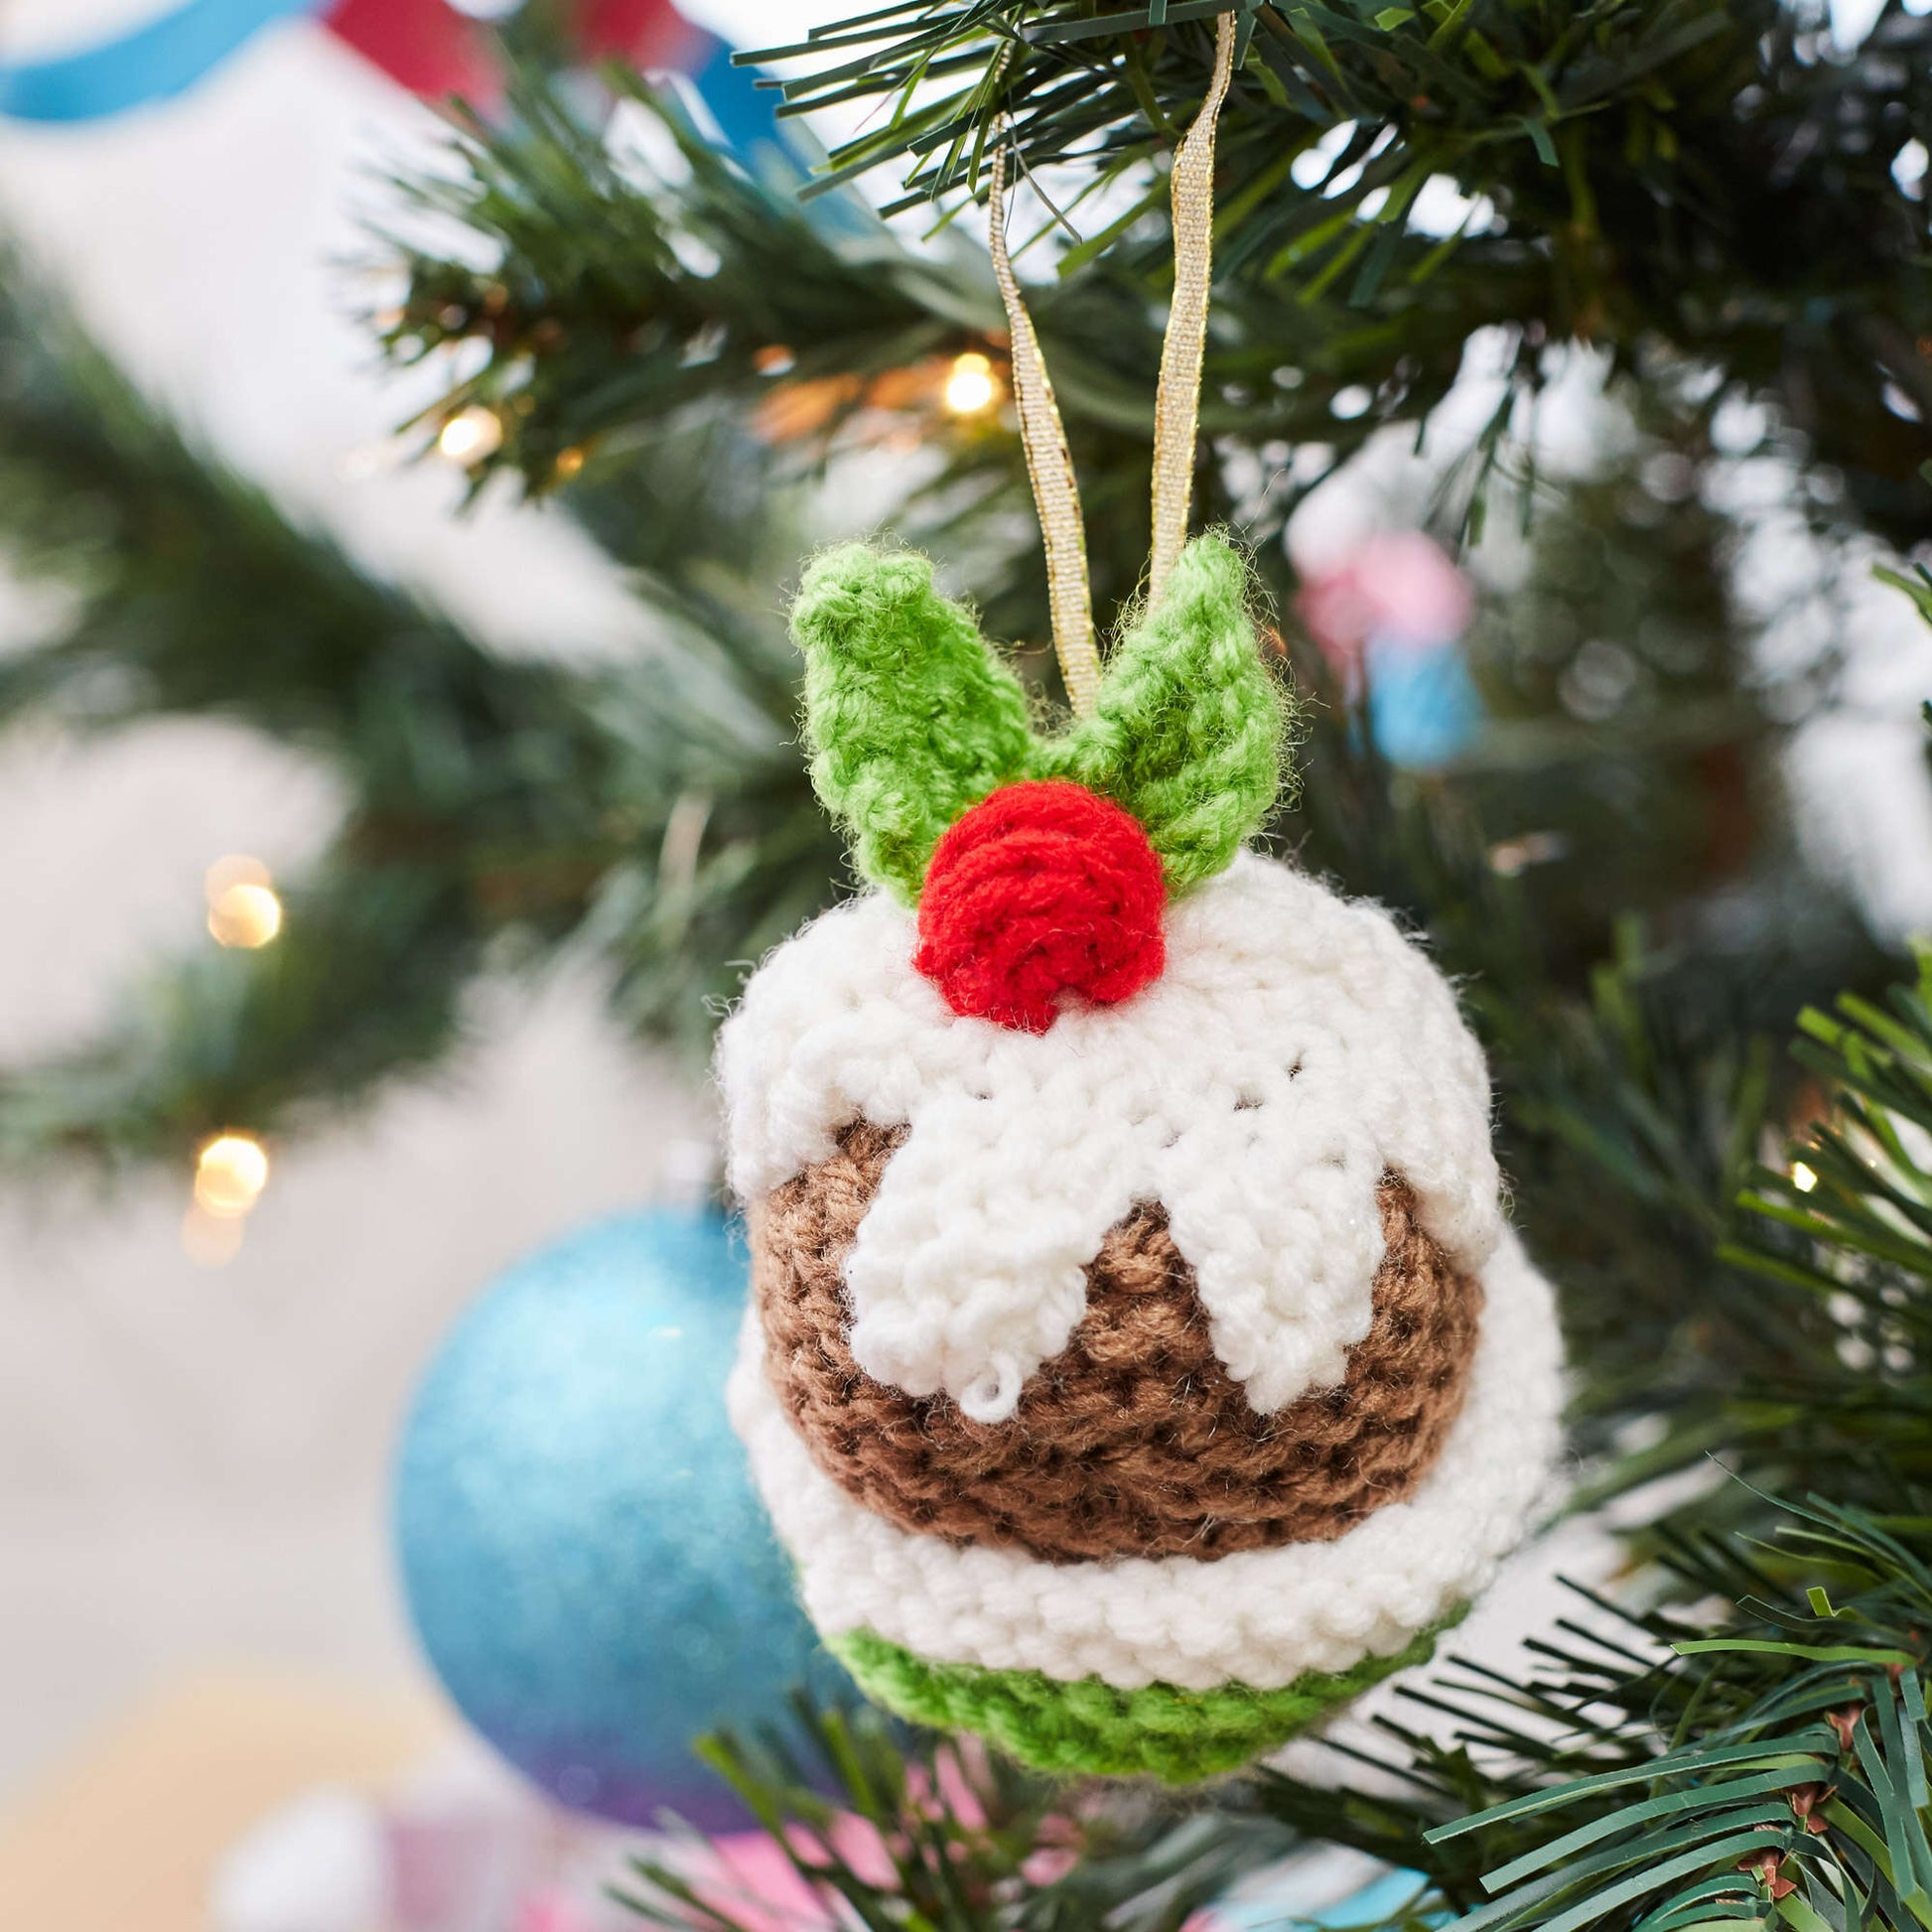 Free Red Heart Knit Christmas Pudding Ornament Pattern